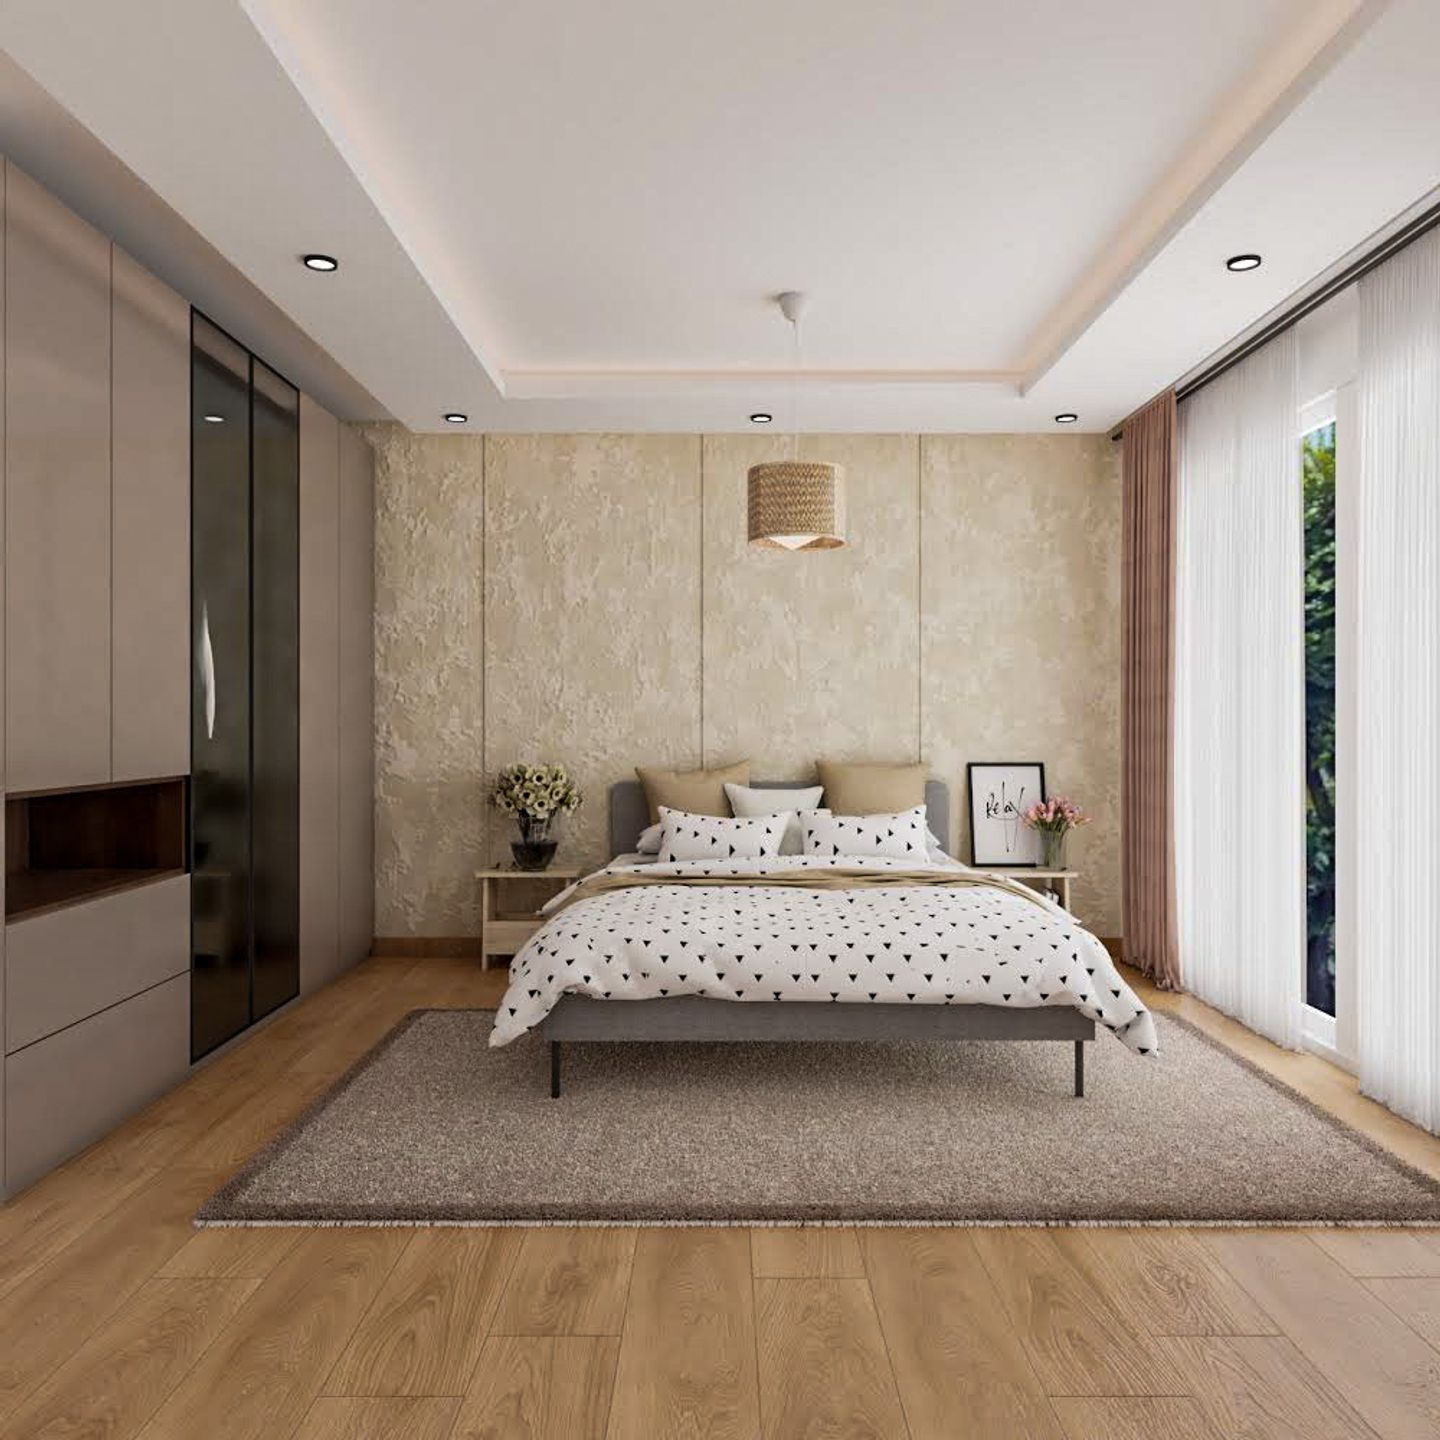 Beige Textured Wall Paint With Panels In A Contemporary Aesthetic - Livspace